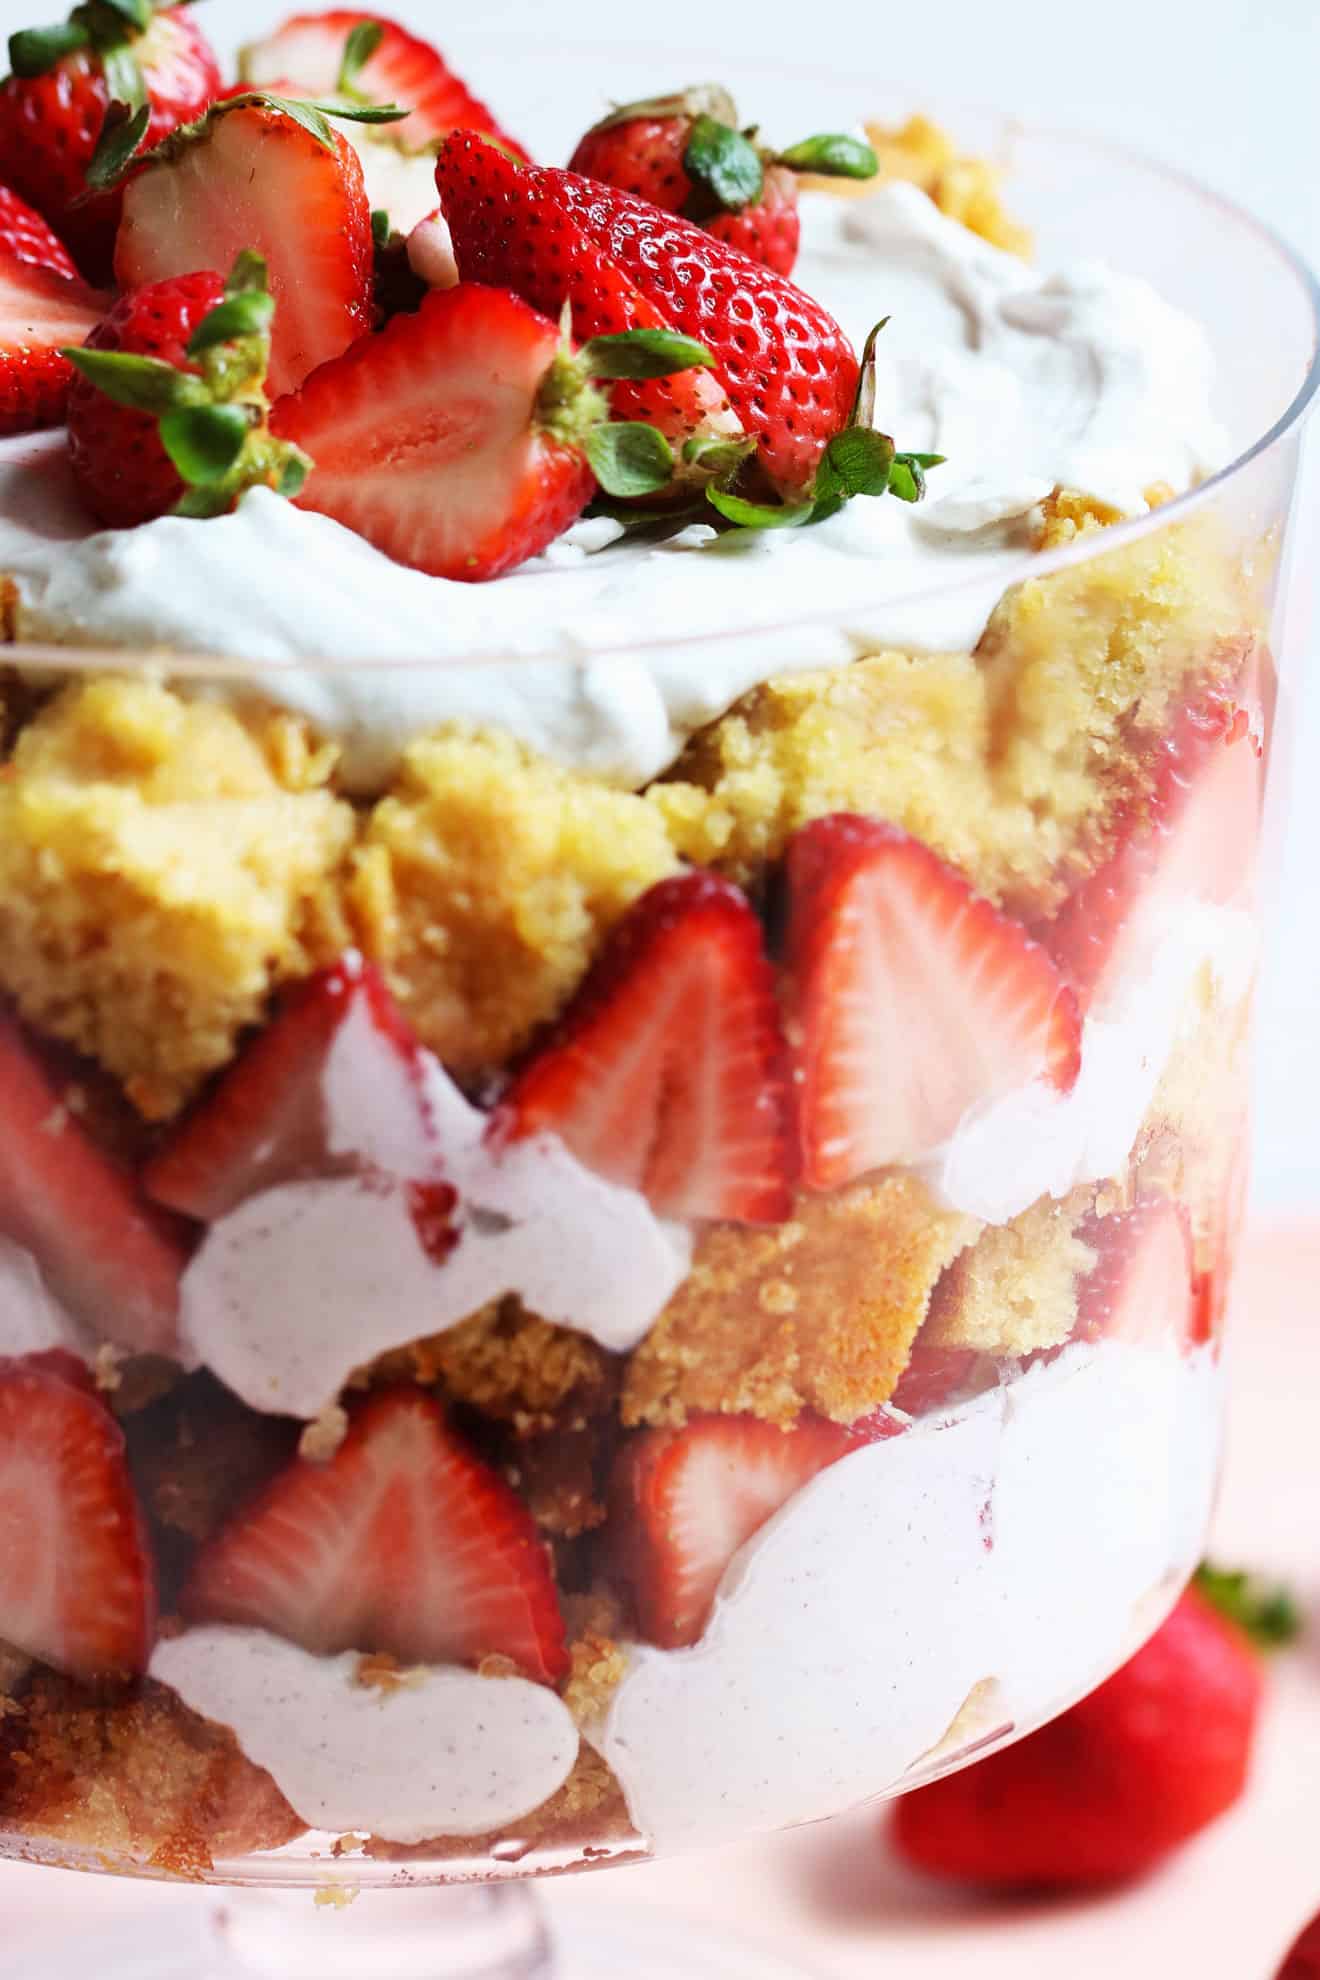 Strawberry Coconut Whip Trifle